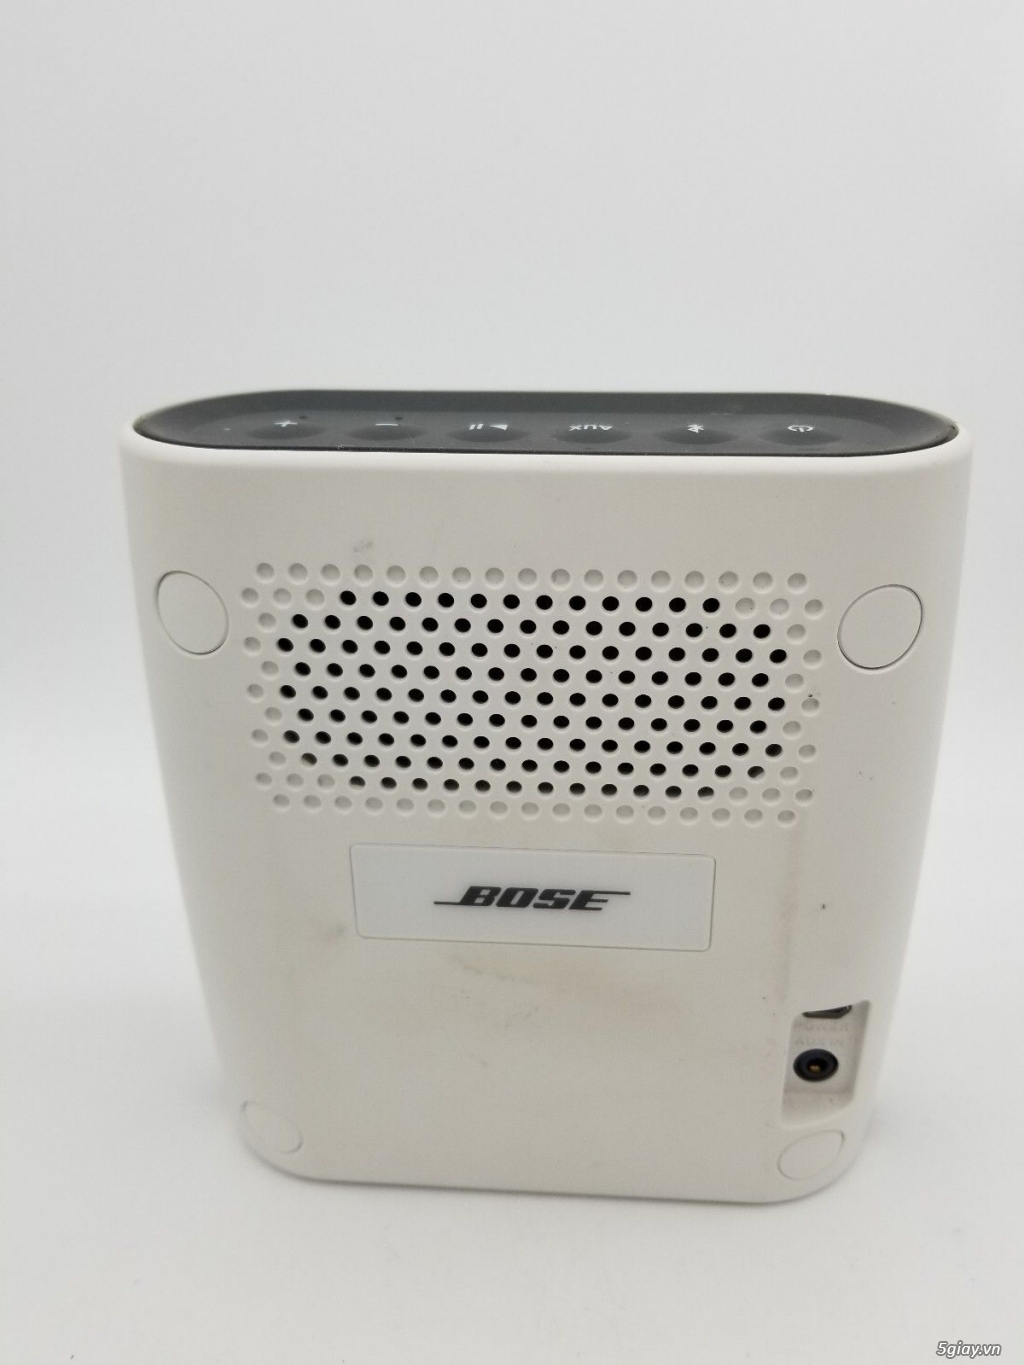 Bose SoundLink Color 1 ,made in mexico - 2